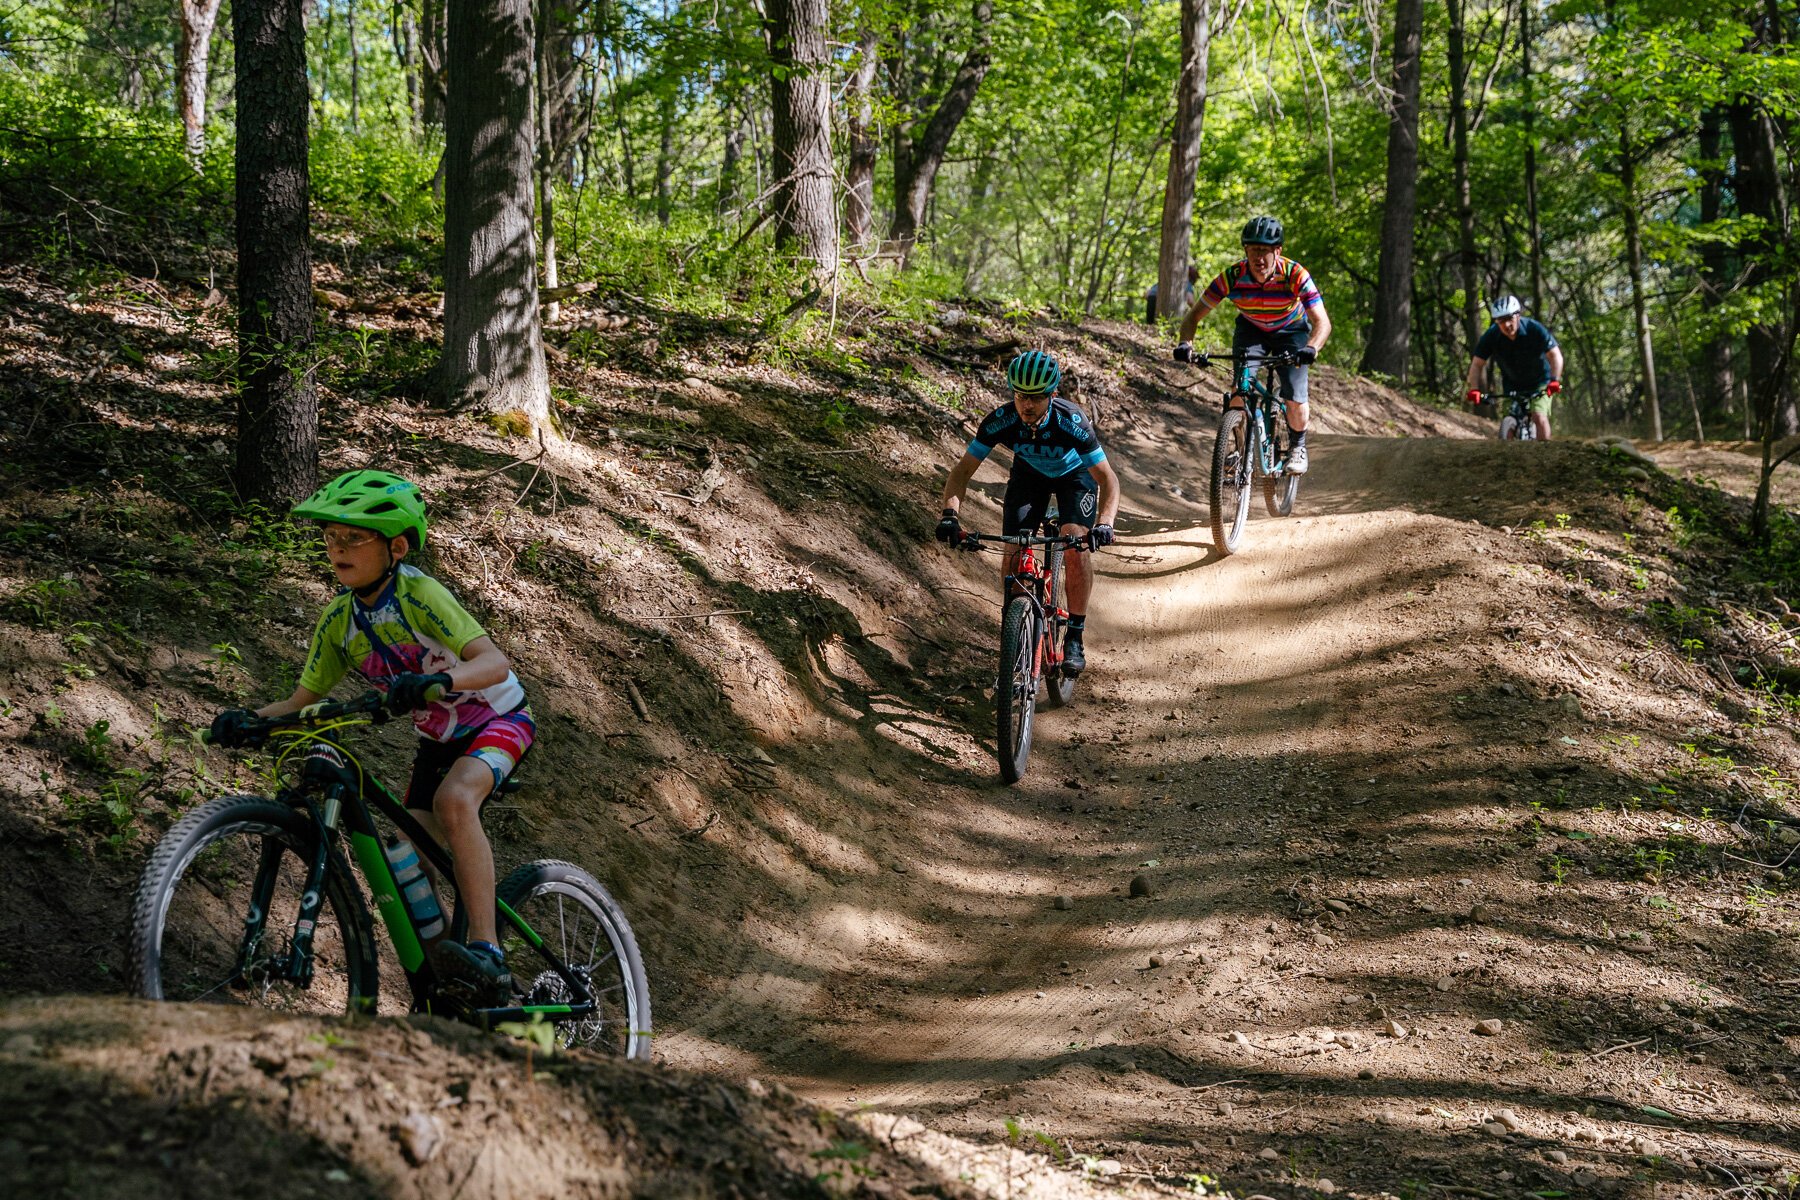 From left, Tyler and Adam Pokowski, Steve Vigneau, and Wade Robbins ride the Shelden Trails at Stony Creek Metropark.